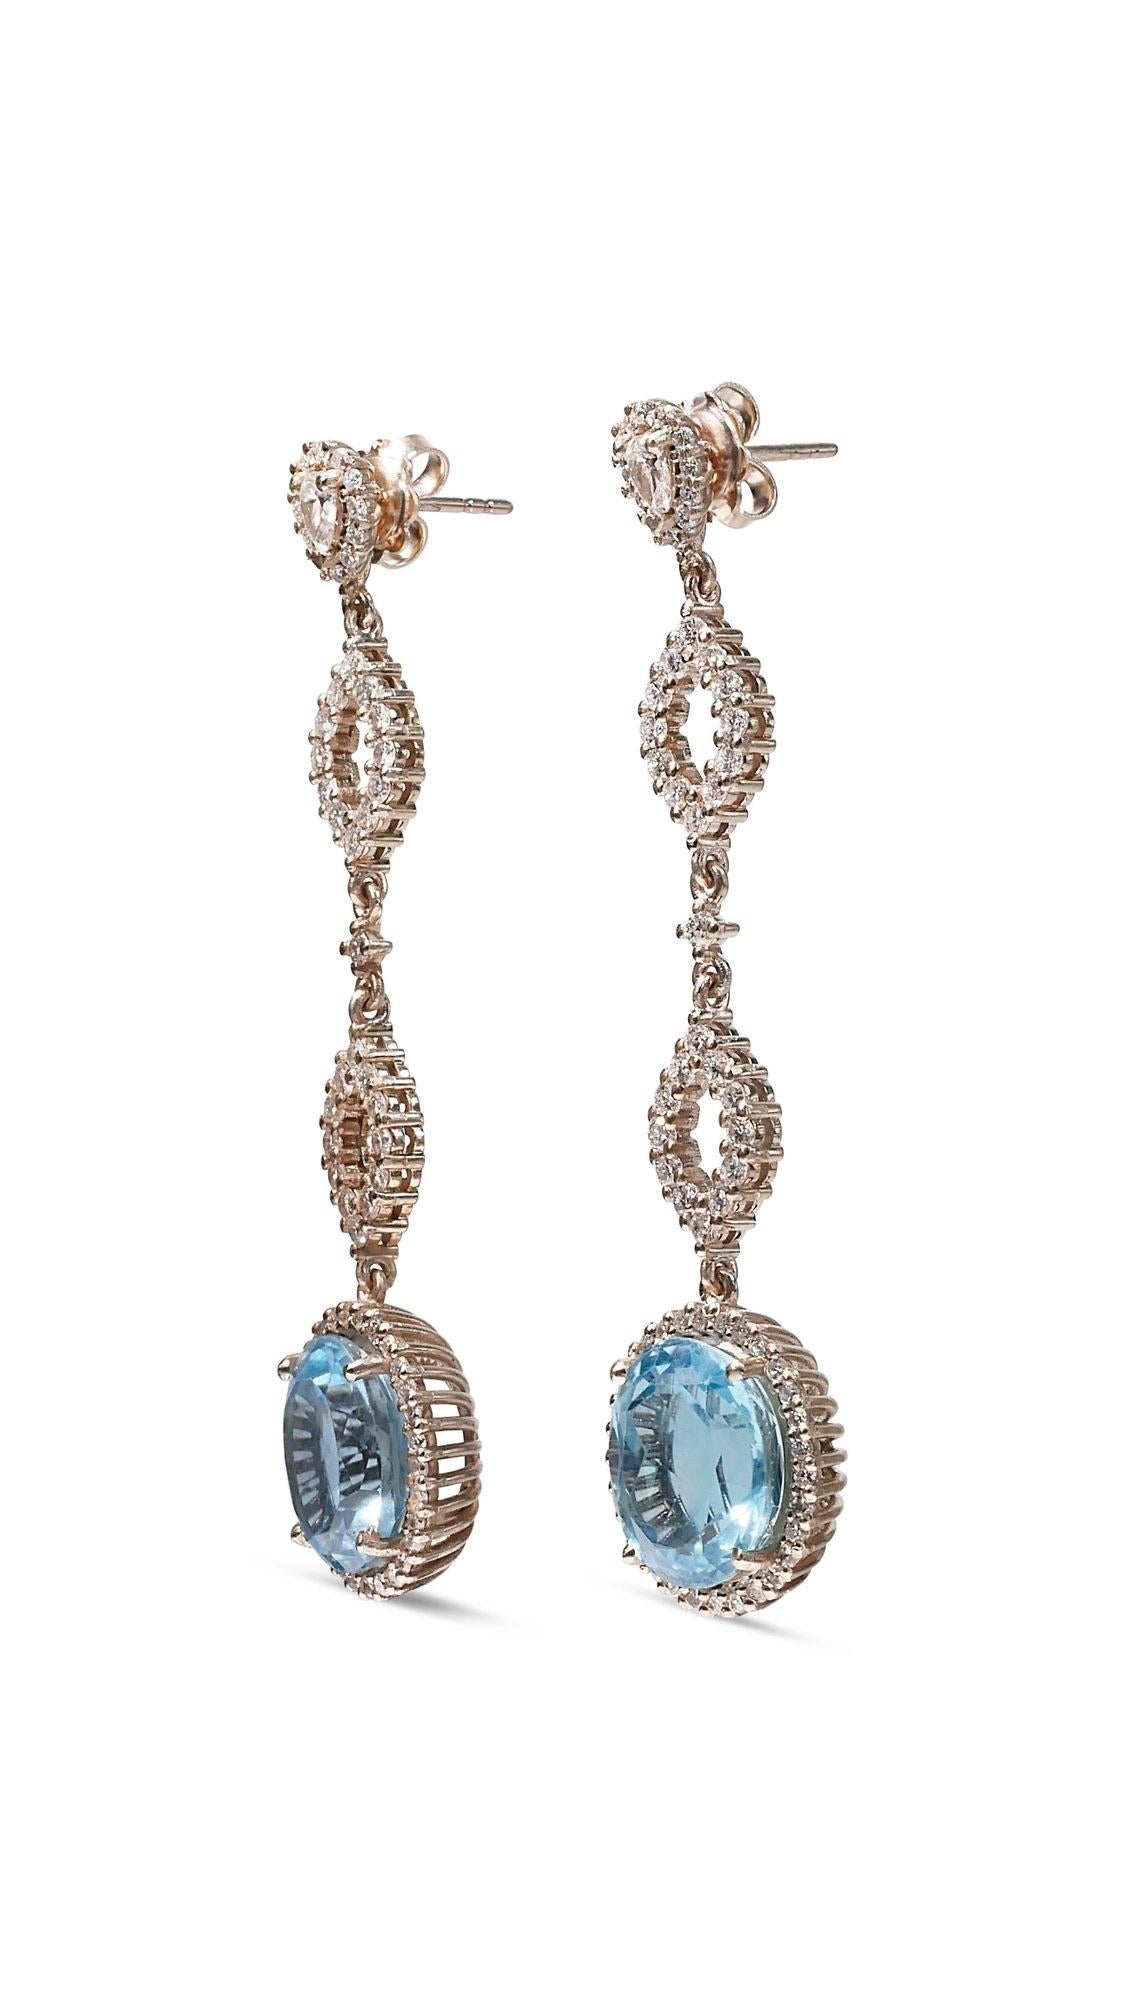 18k White Gold Drop Earrings with 17.37 ct Natural Topaz and Diamonds IGI Cert For Sale 3